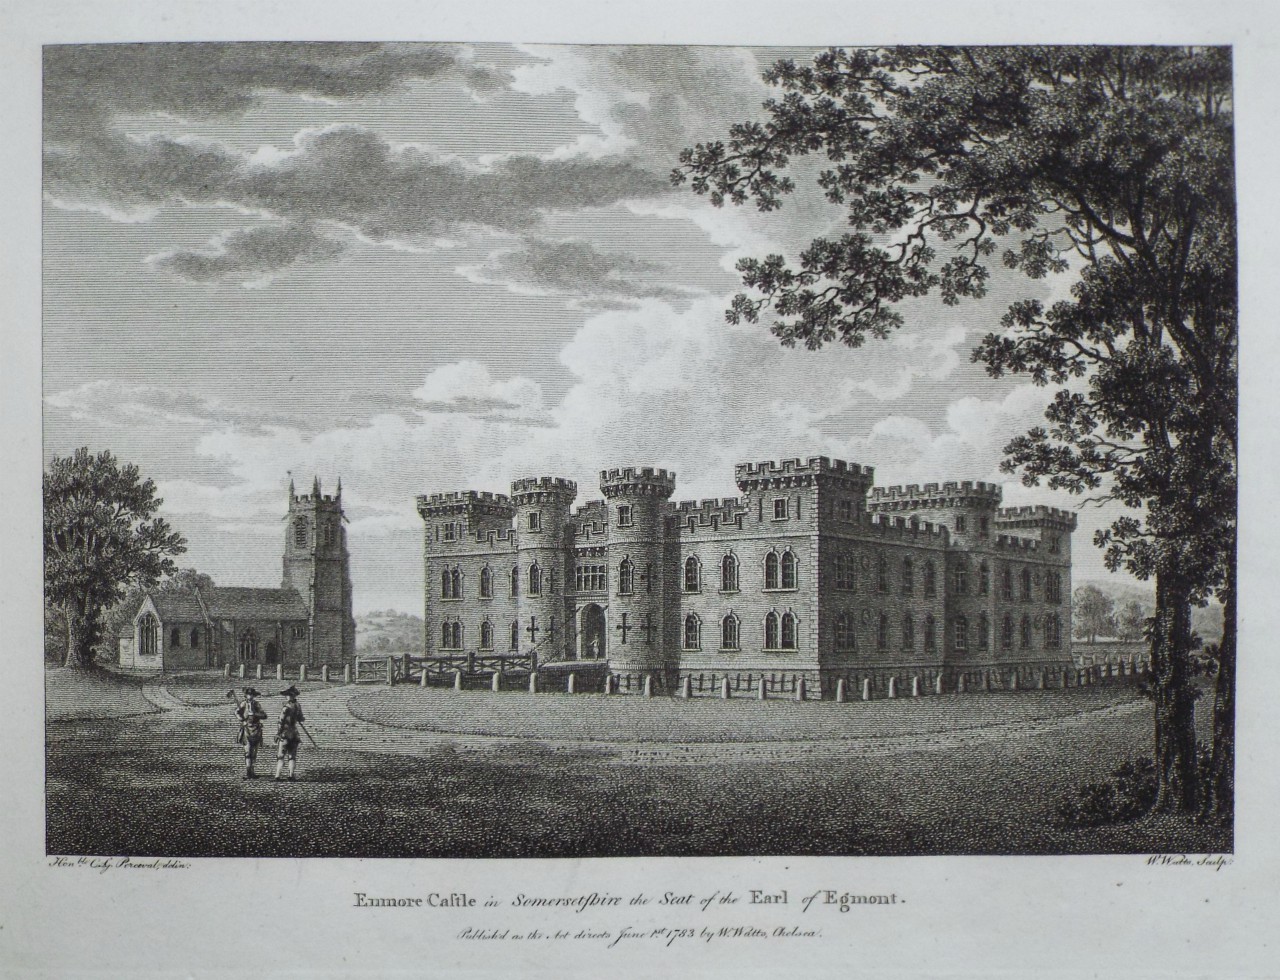 Print - Enmore Castle in Somersetshire, the Seat of the Earl of Egmont. - Watts